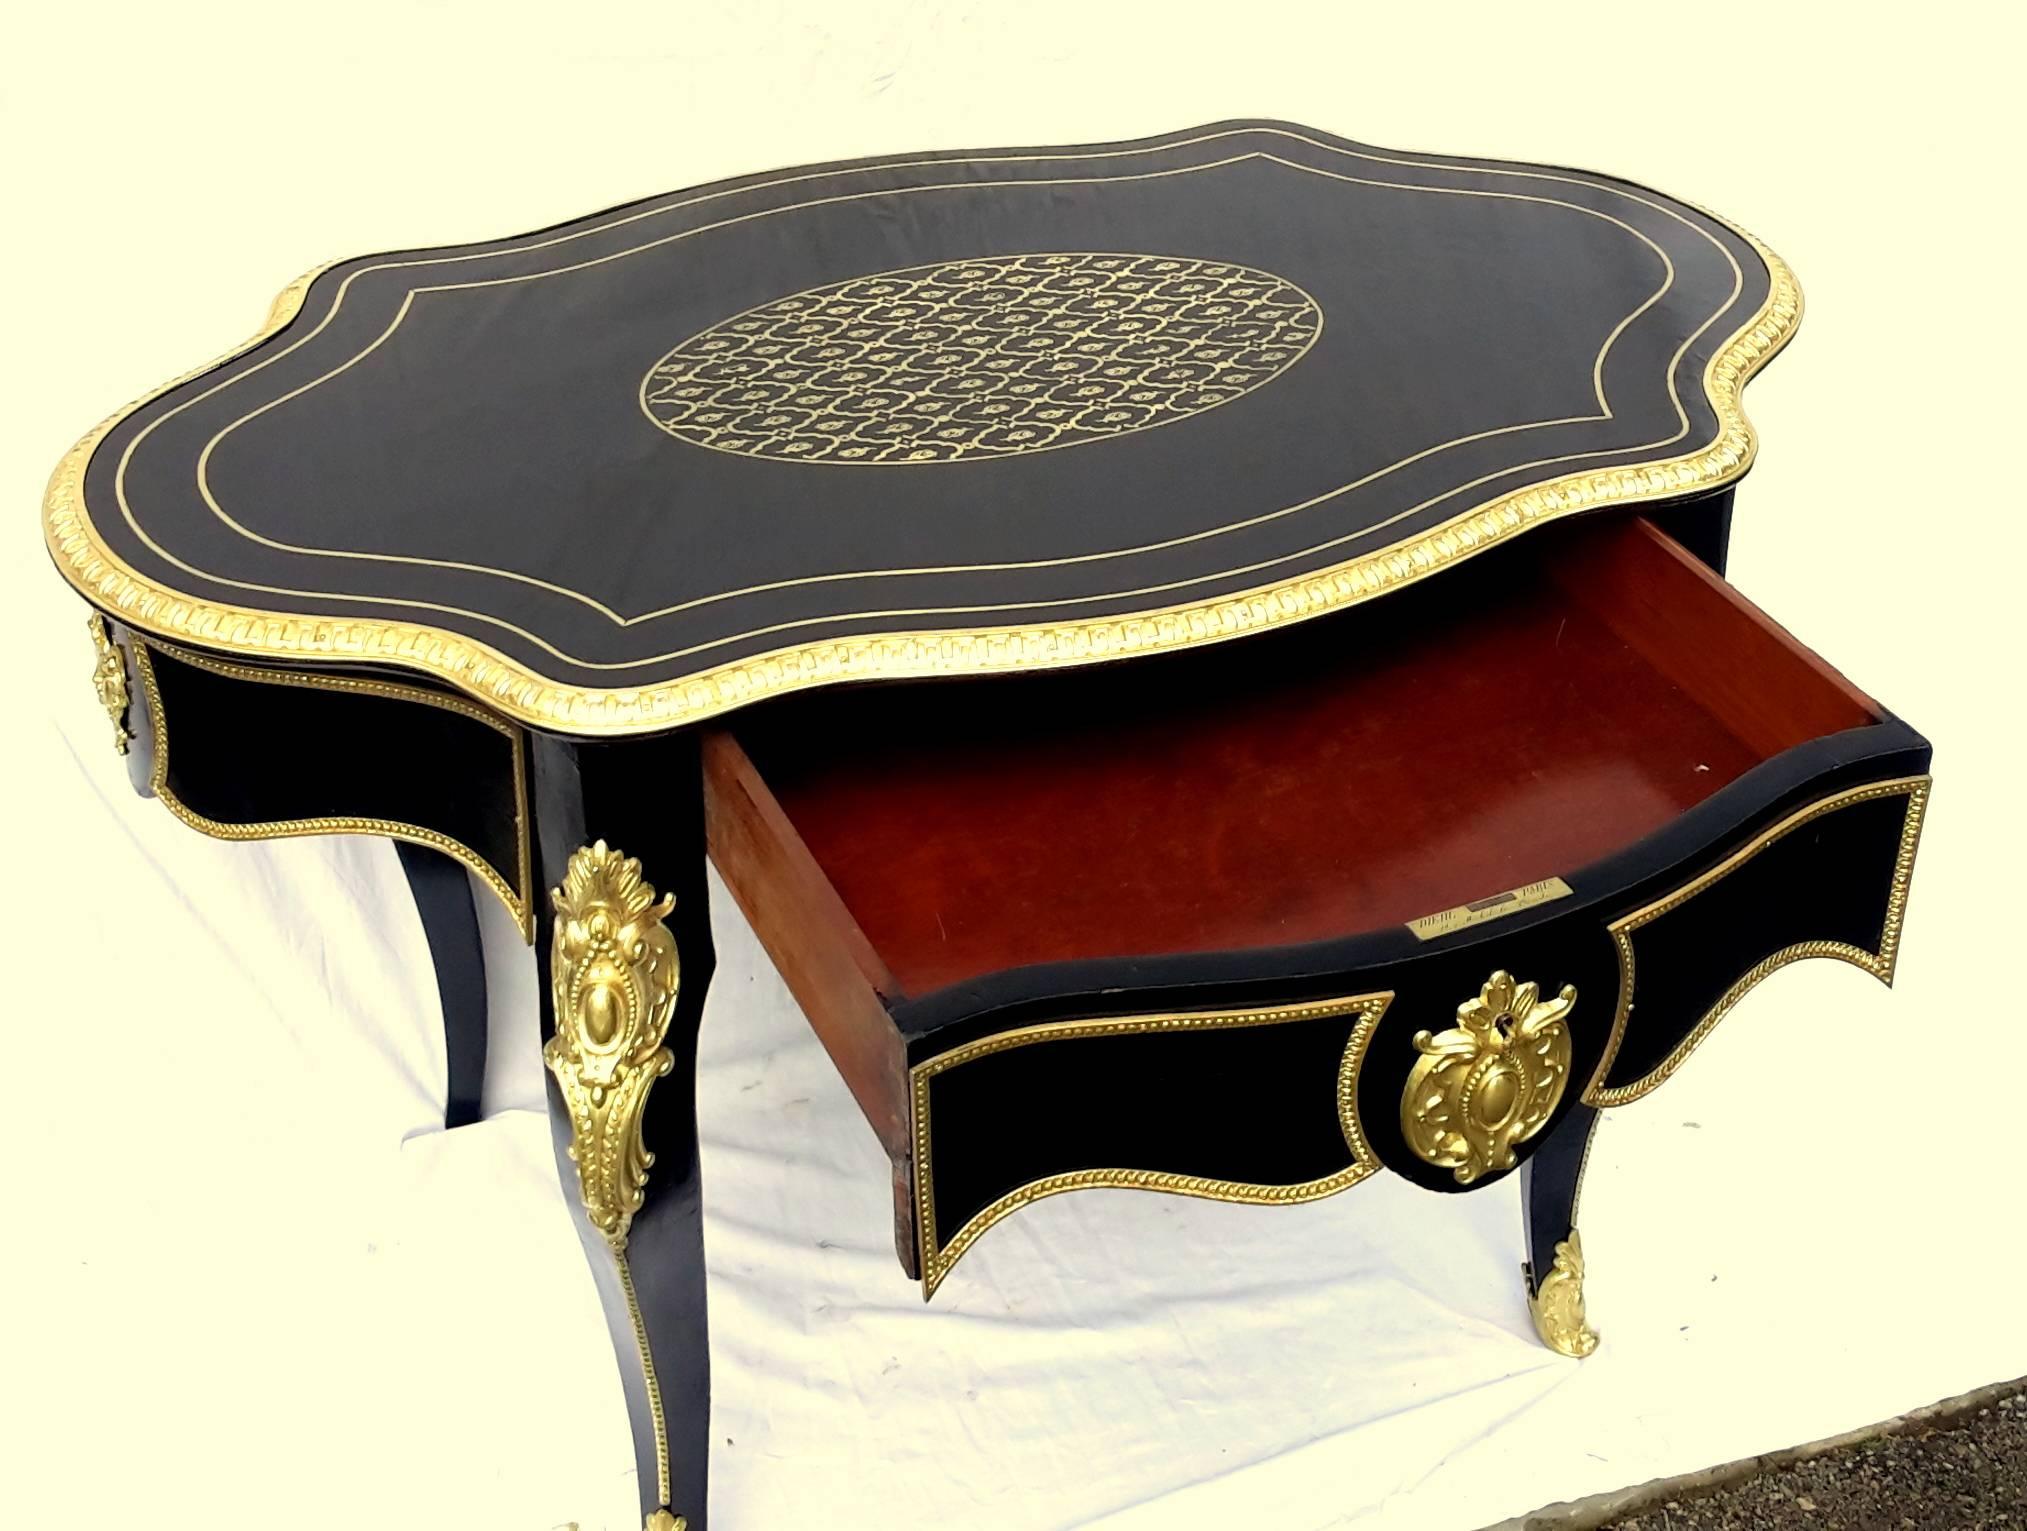 Gorgeous Louis XV style, fiddle desk writing dining table, France, circa 1870
In the period of Napoleon III.
Signed by Diehl, in an excellent general condition.
Totally restored by specialists.
Made in veneered ebony and Boulle style marquetry